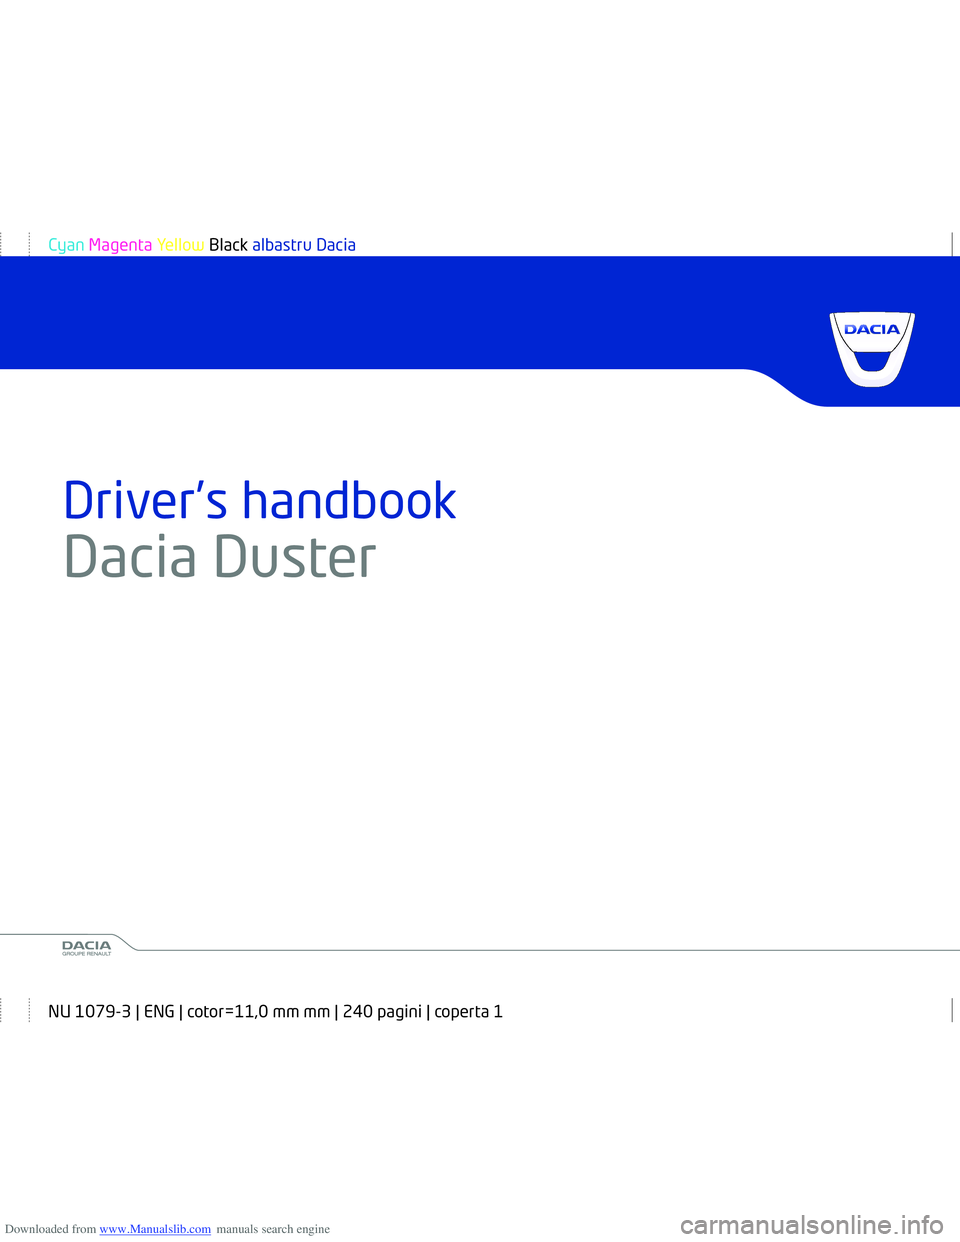 DACIA DUSTER 2021  Owners Manual Downloaded from www.Manualslib.com manuals search engine www.daciagroup.com
Driver’s handbook
Dacia  Duster        
Ref 999101781R / édition anglaiseNU 1079-3 - 07/2014
Cyan Magenta Yellow Black al